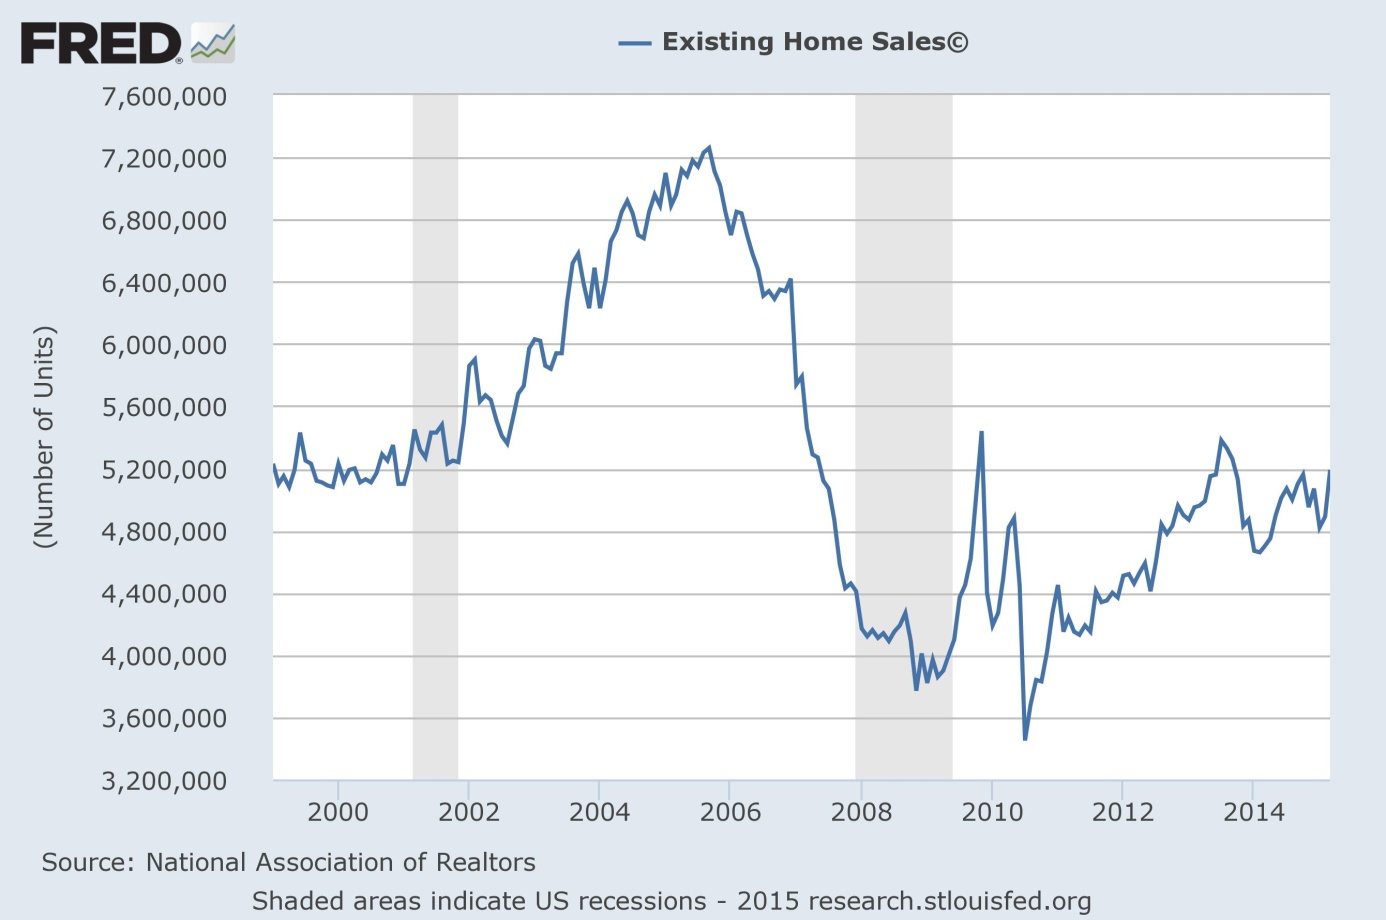 Existing home sales from 1999 to 2015